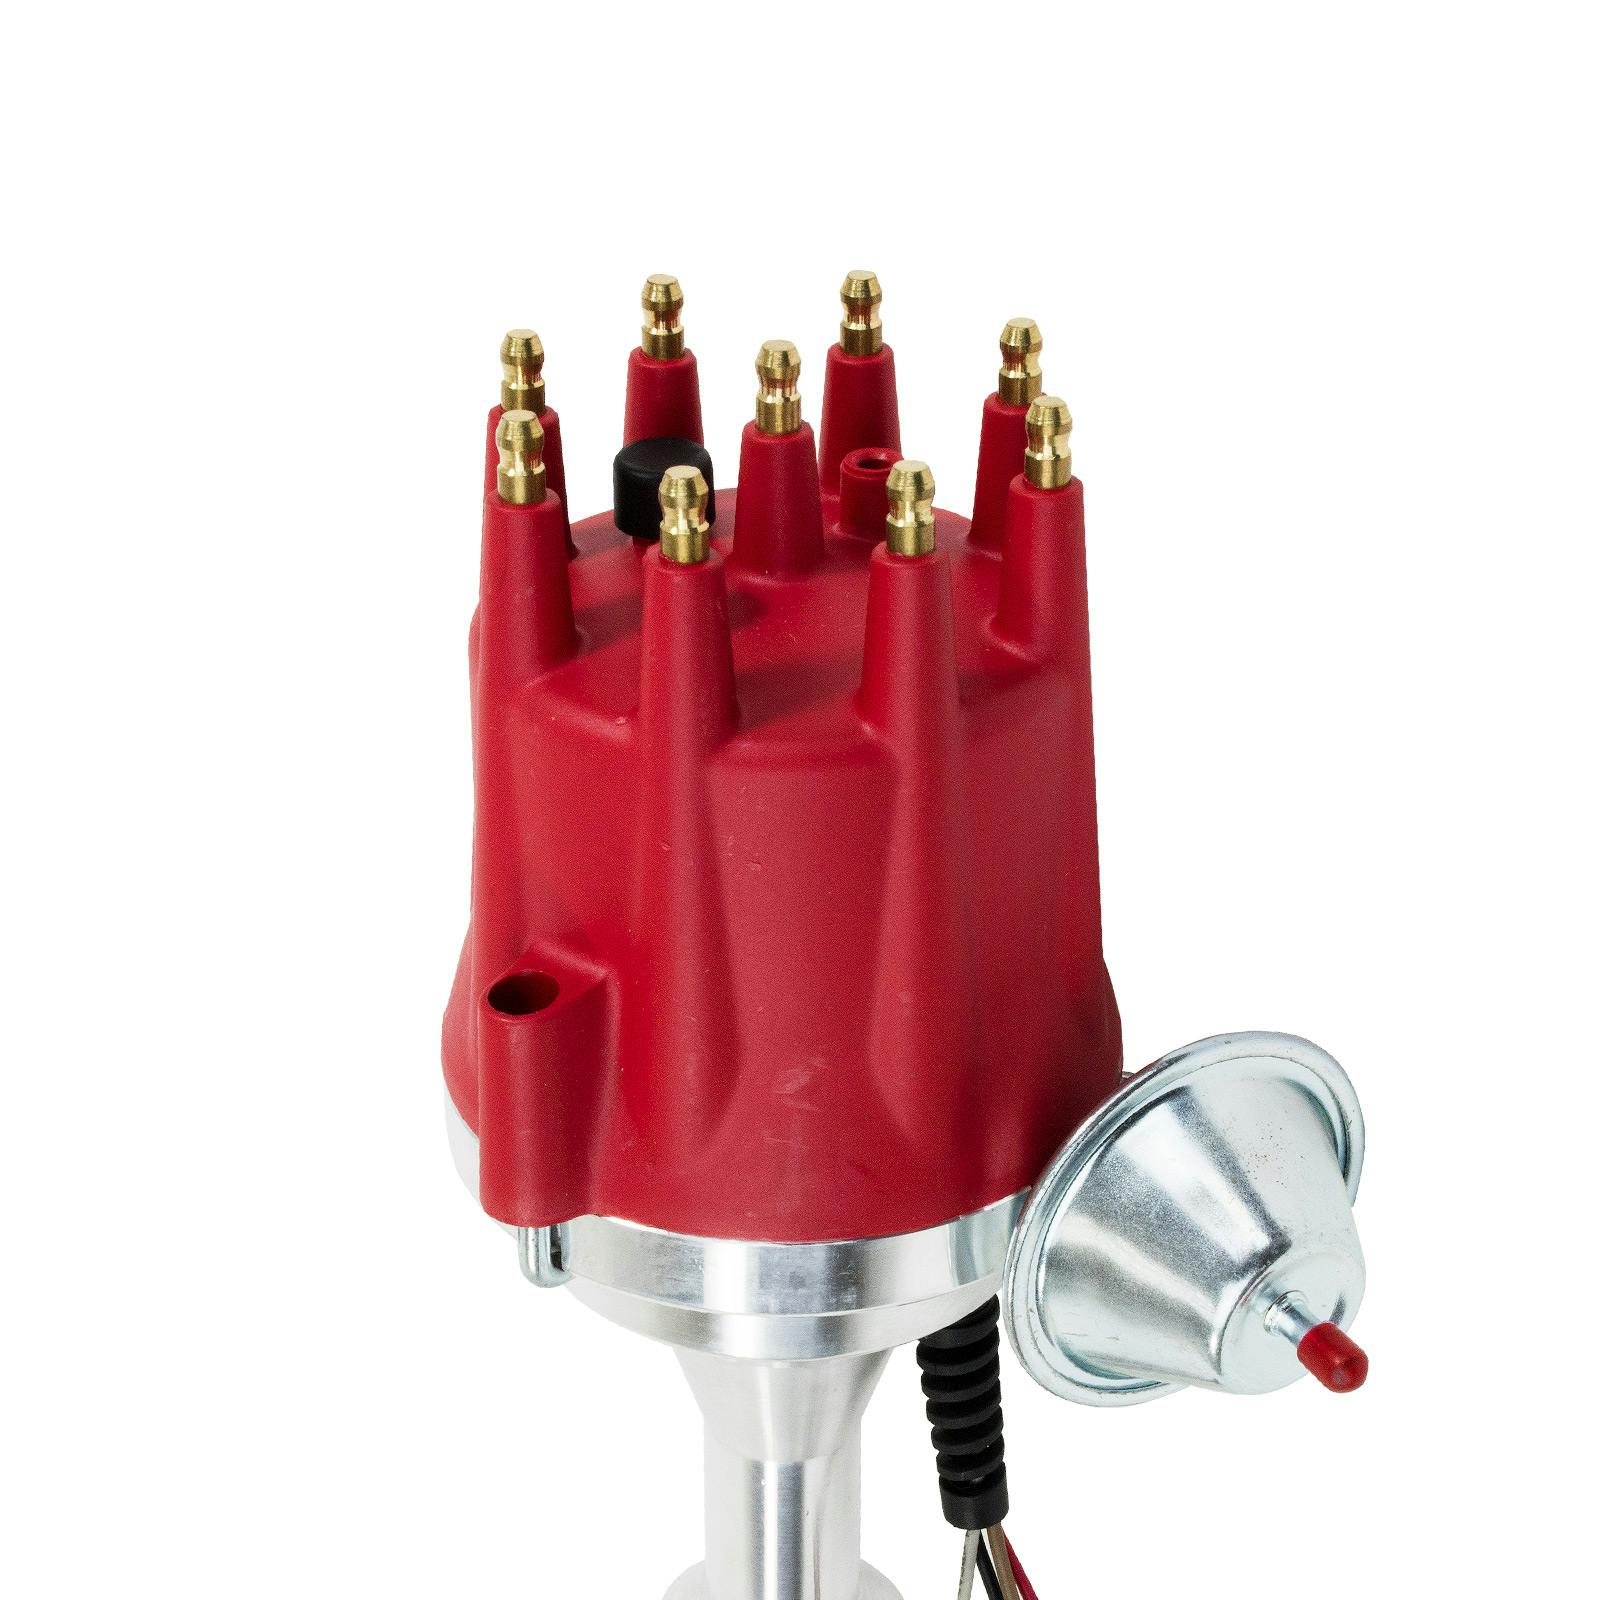 Top Street Performance JM7709R Pro Series Ready-To-Run Distributor with Red Cap 